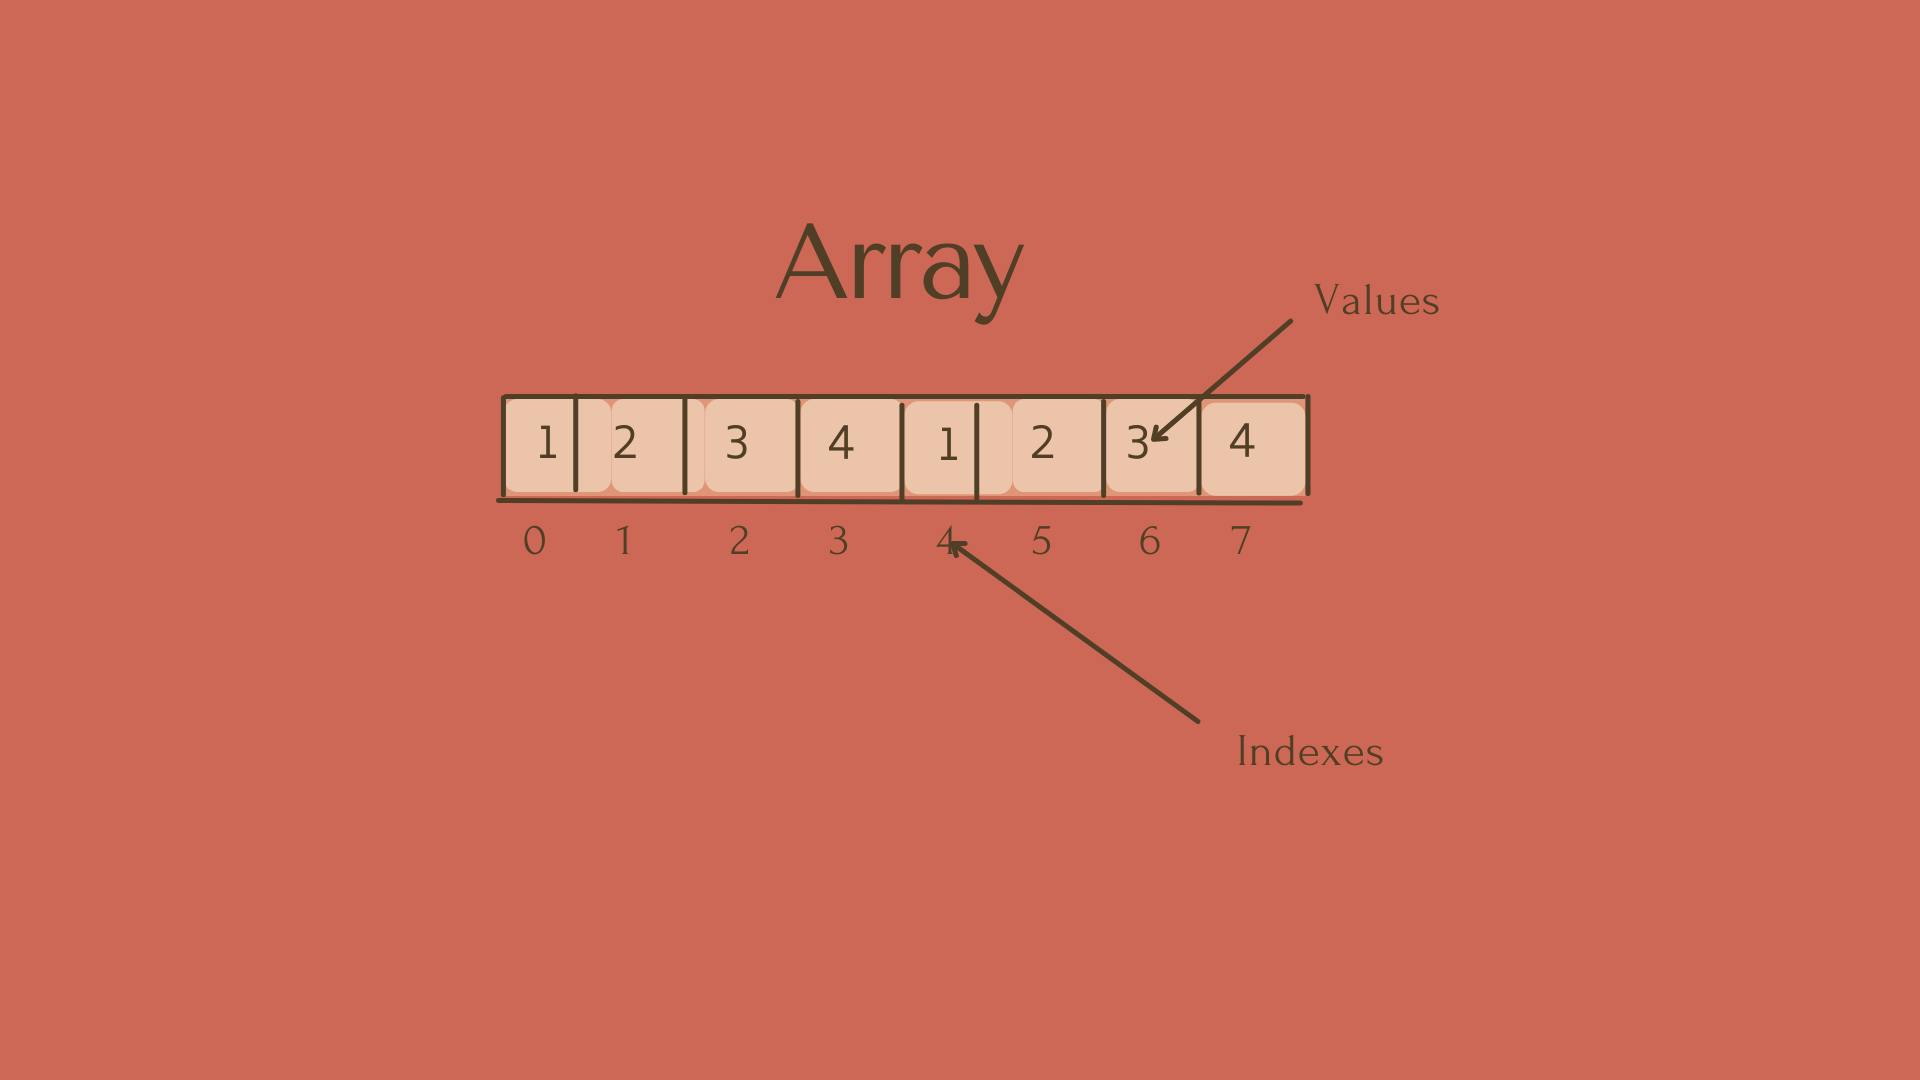 Array.png